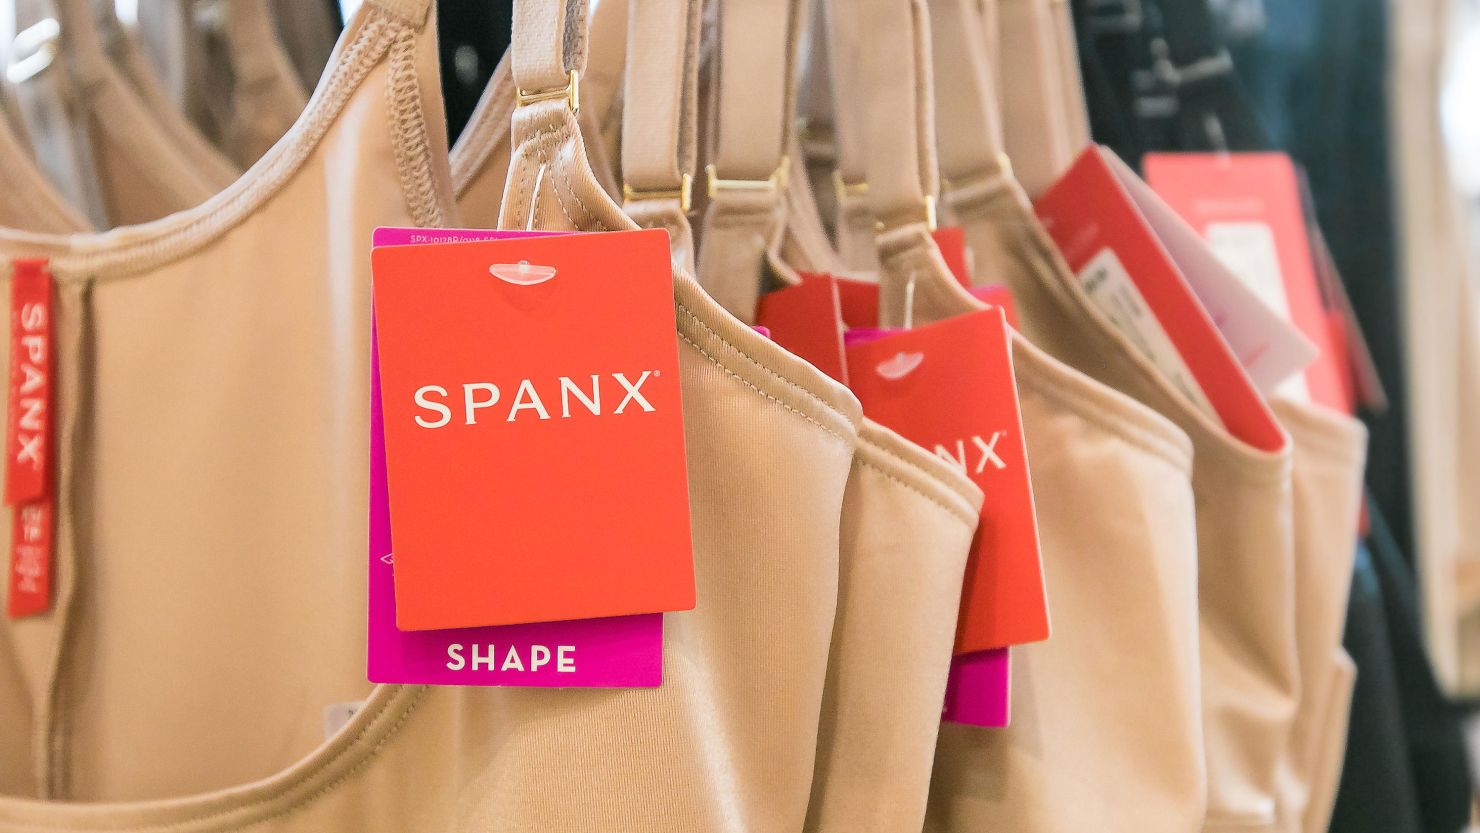 How to Build A Billion-Dollar DTC Brand: The Story of Spanx